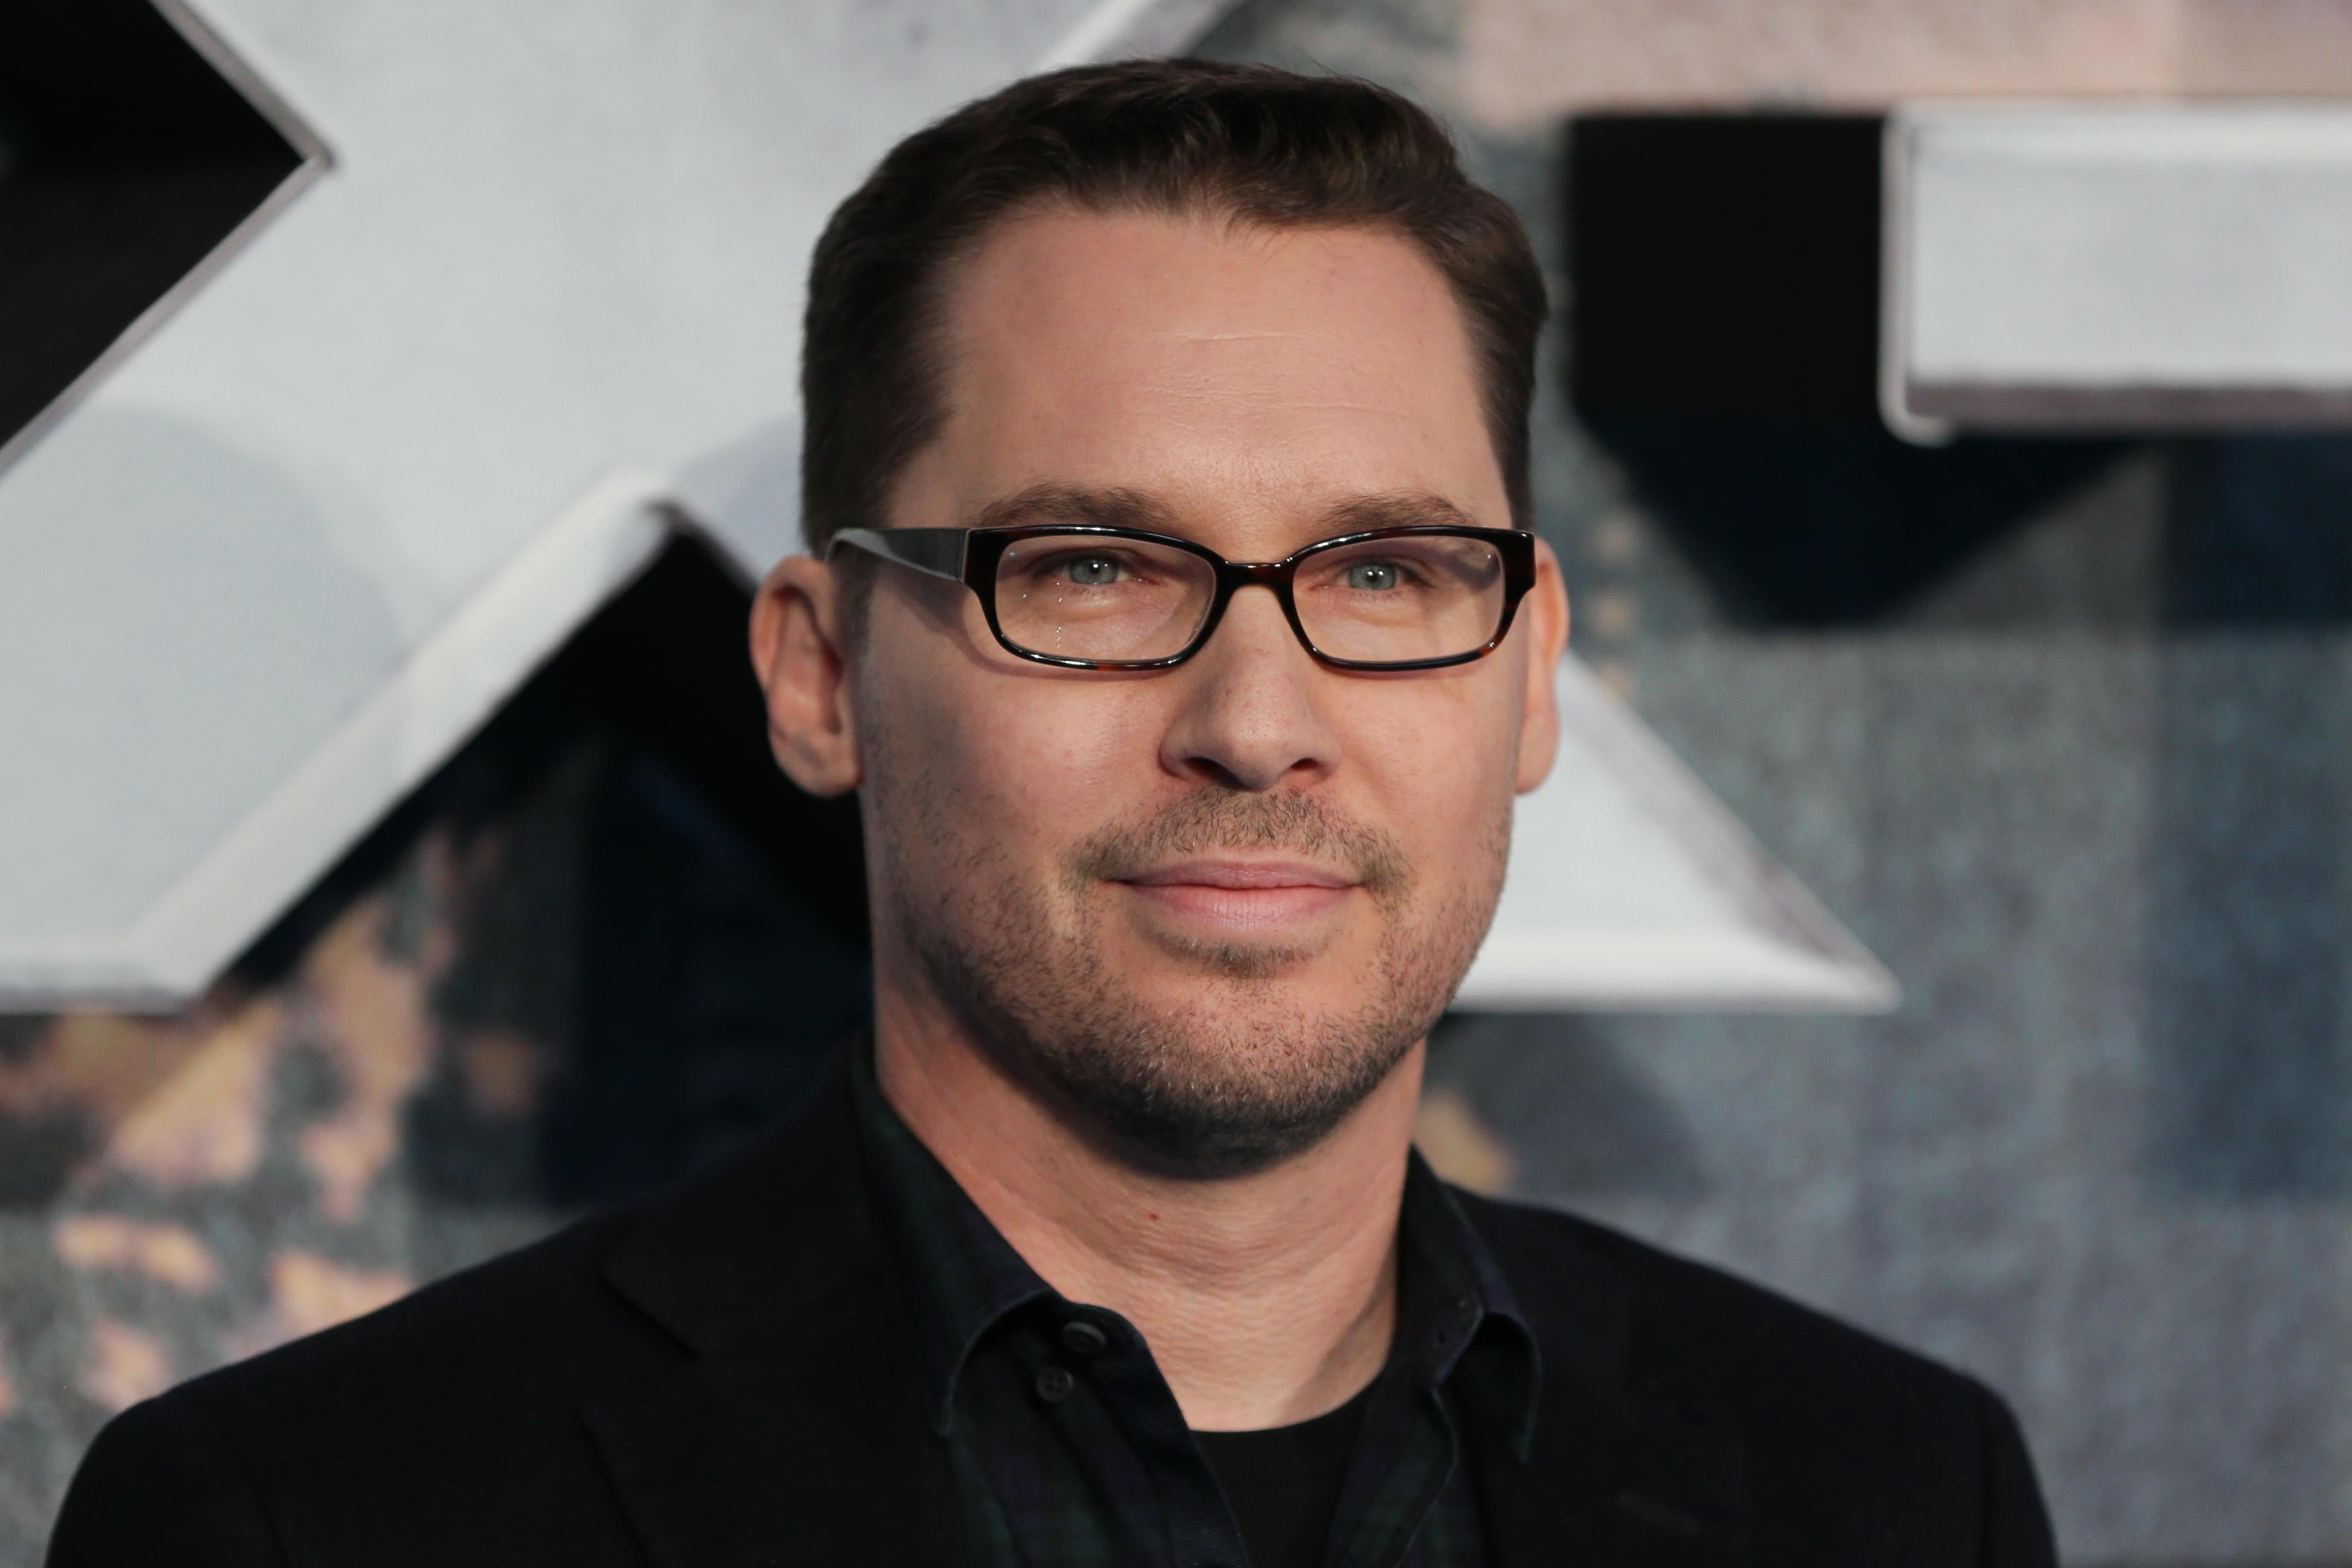 Bryan Singer, wearing a black suit and black glasses, stands in front of a large silver X.